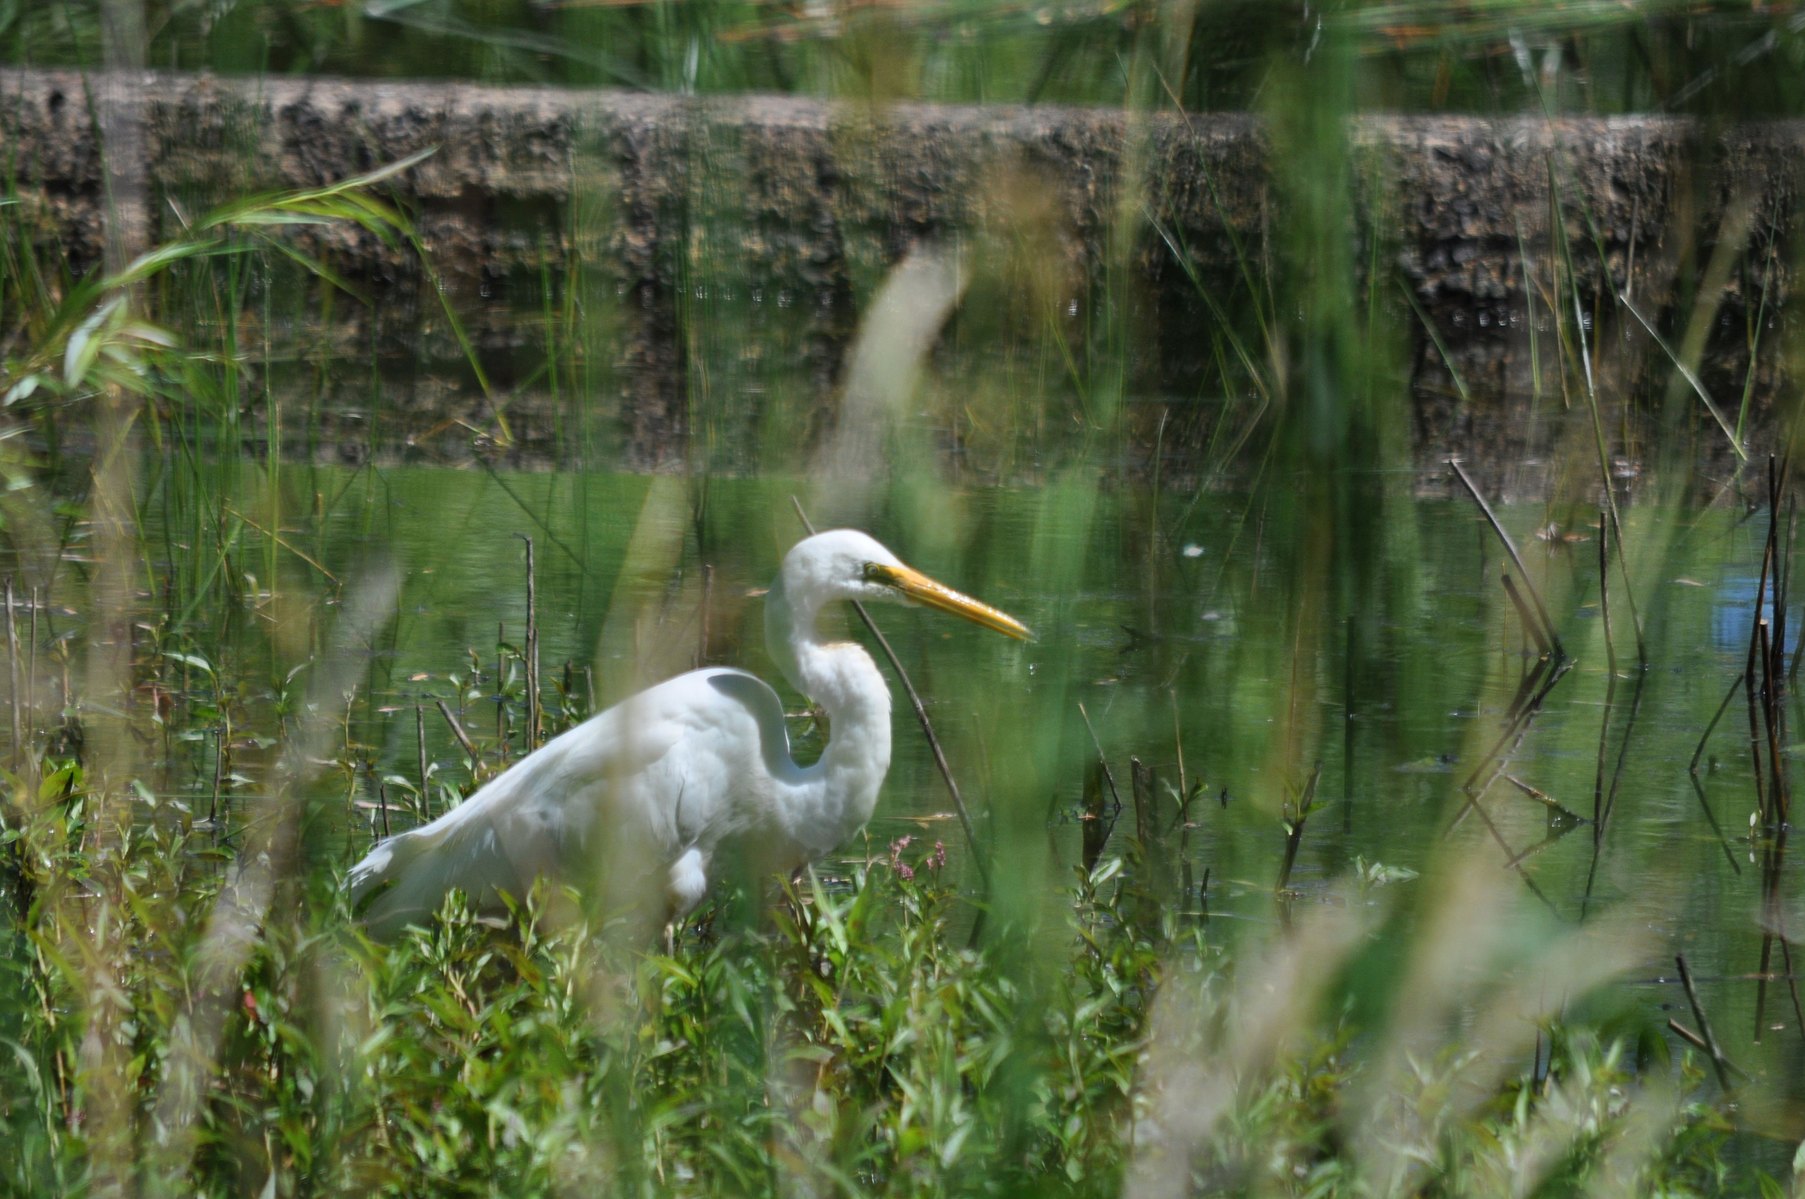 White Heron hunting frogs in its natural habitat of a waterhole with reedy grass around it. Photo taken by Planet Designs Kids.